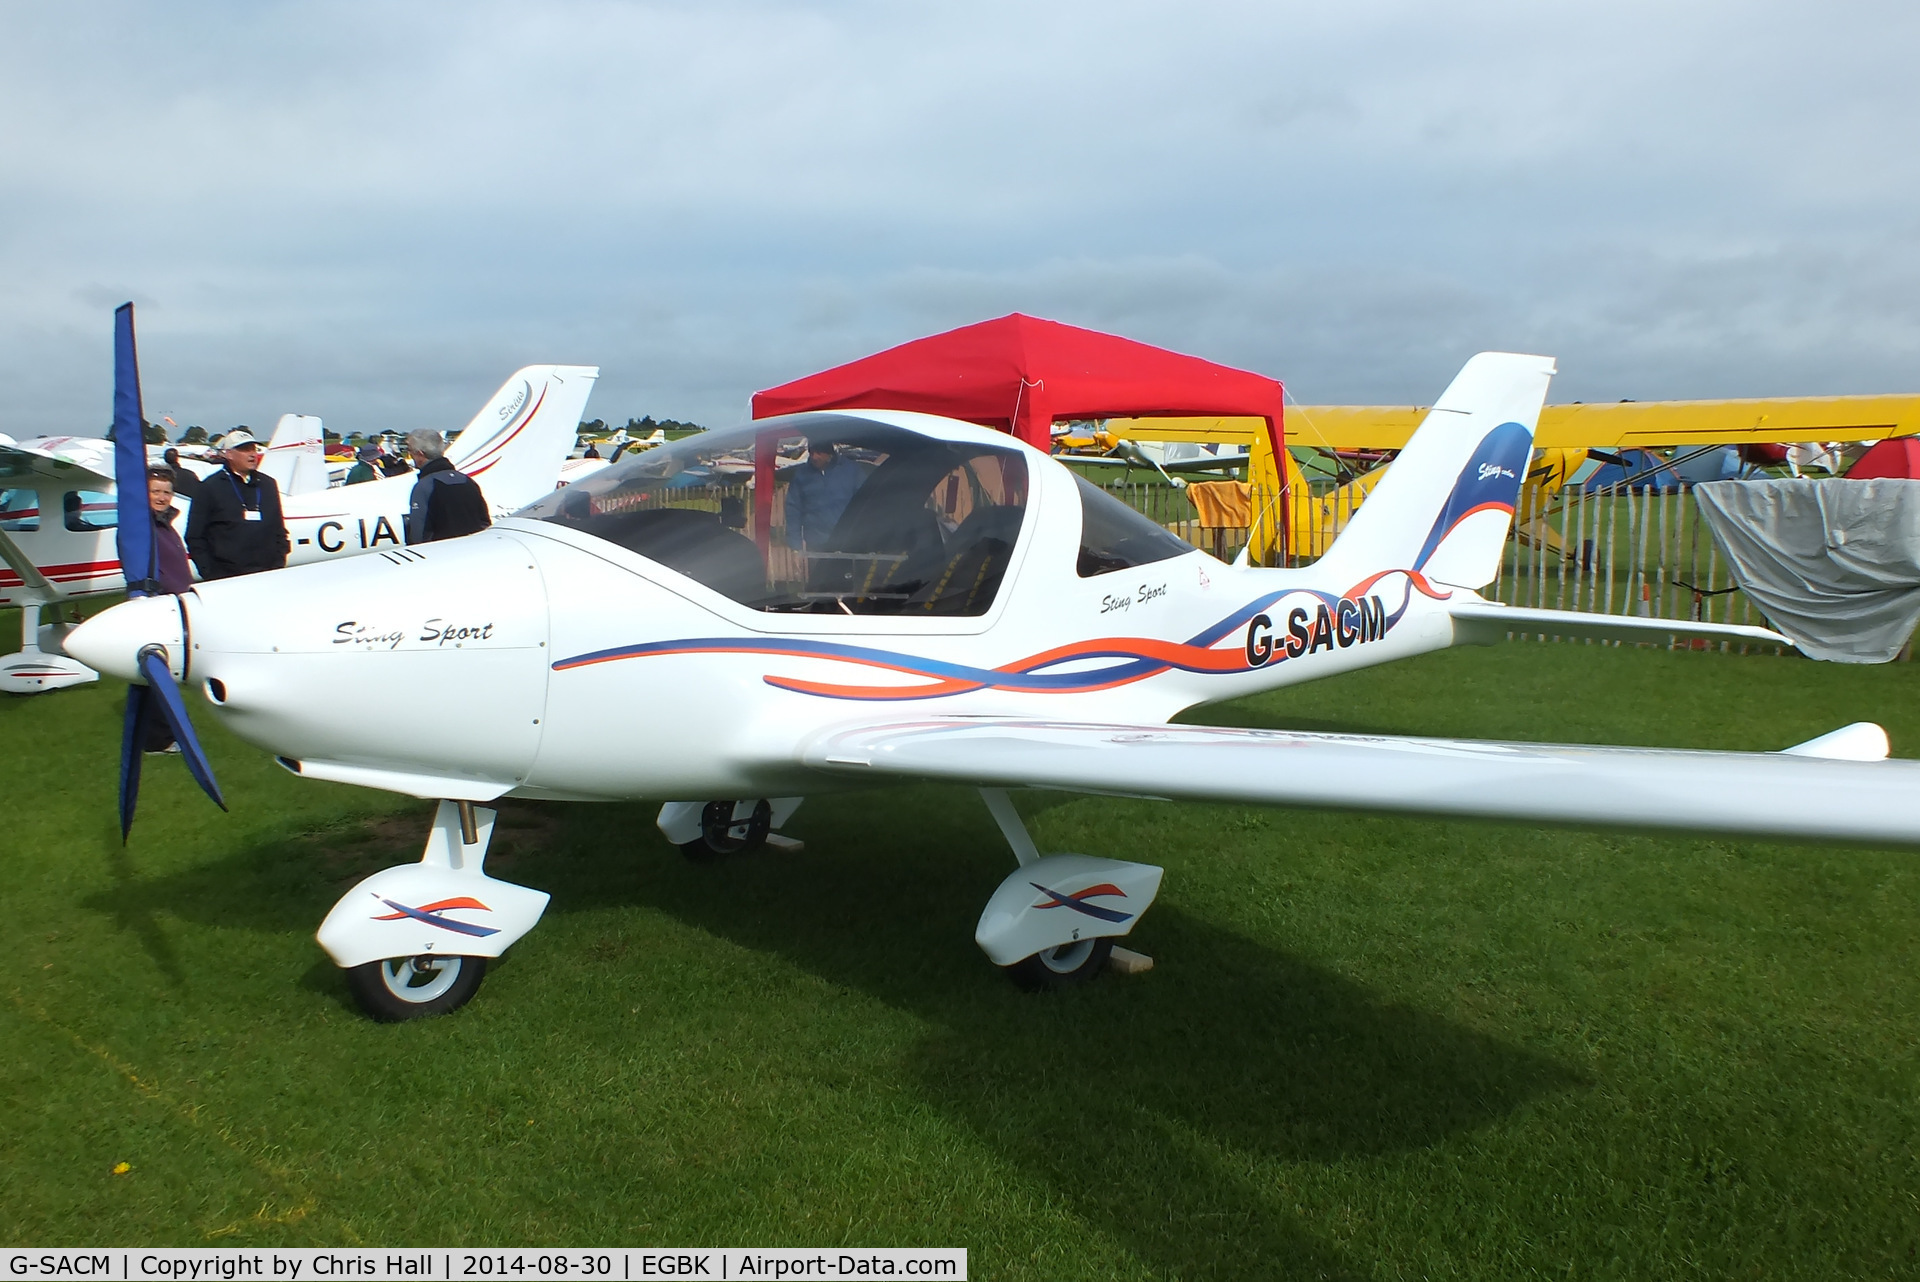 G-SACM, 2011 TL Ultralight TL-2000UK Sting Carbon C/N LAA 347-14798, at the LAA Rally 2014, Sywell